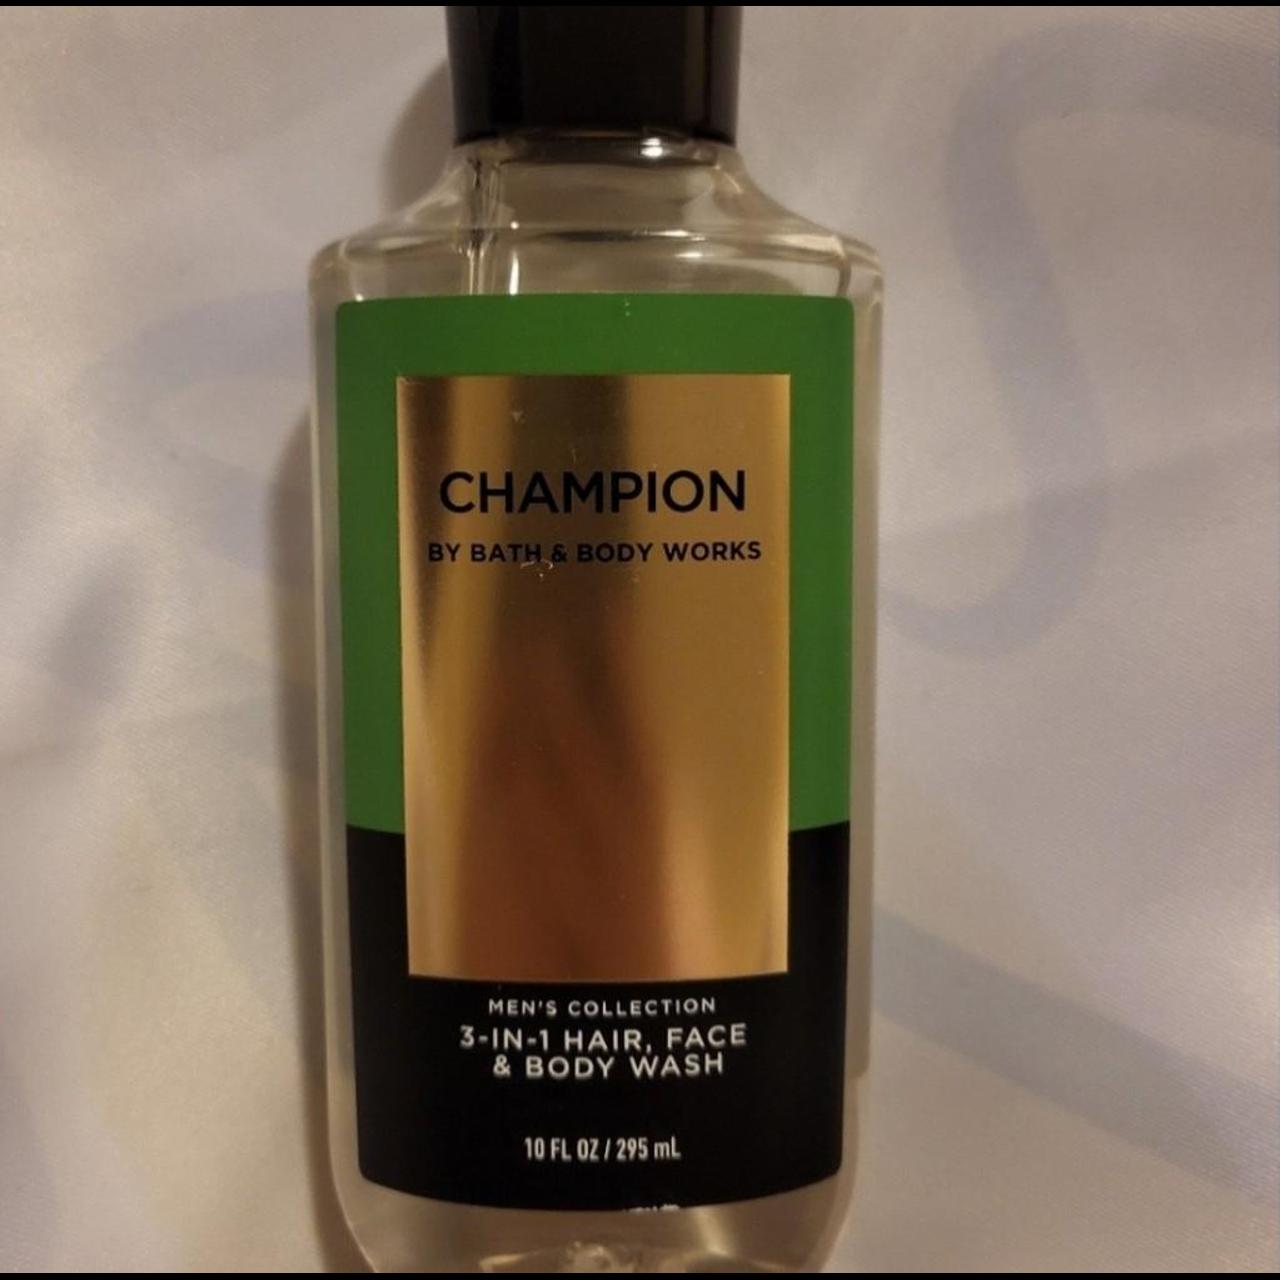 Product Image 1 - Champion men's collection Body wash.